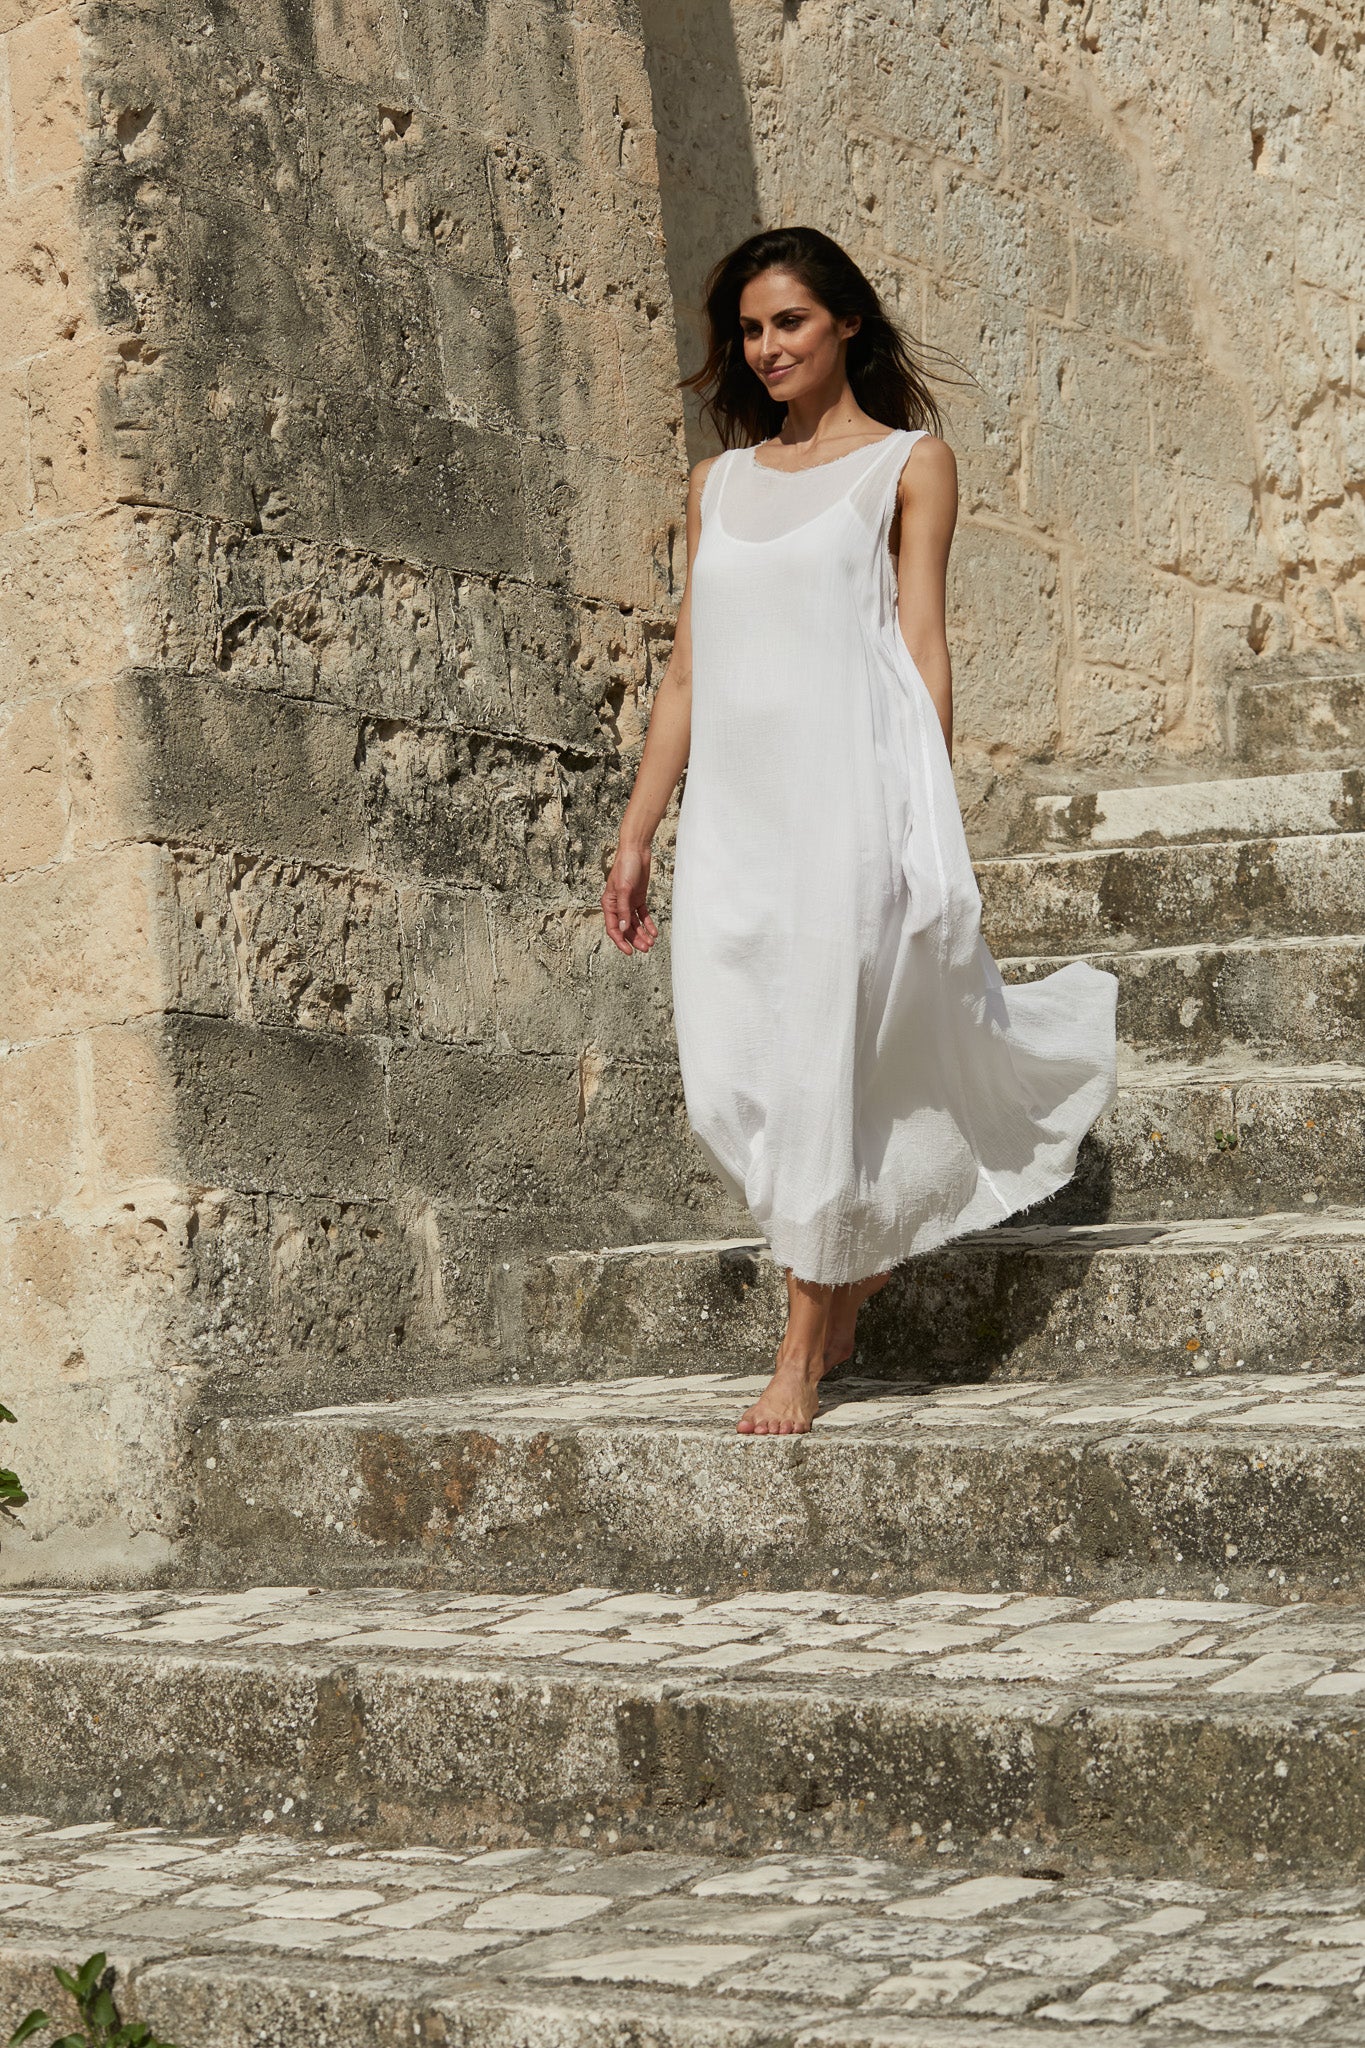 A MegbyDesign model is wearing a white gauze cotton angelica dress. The white angelica dress is made from a beautifully lightweight gauze cotton.